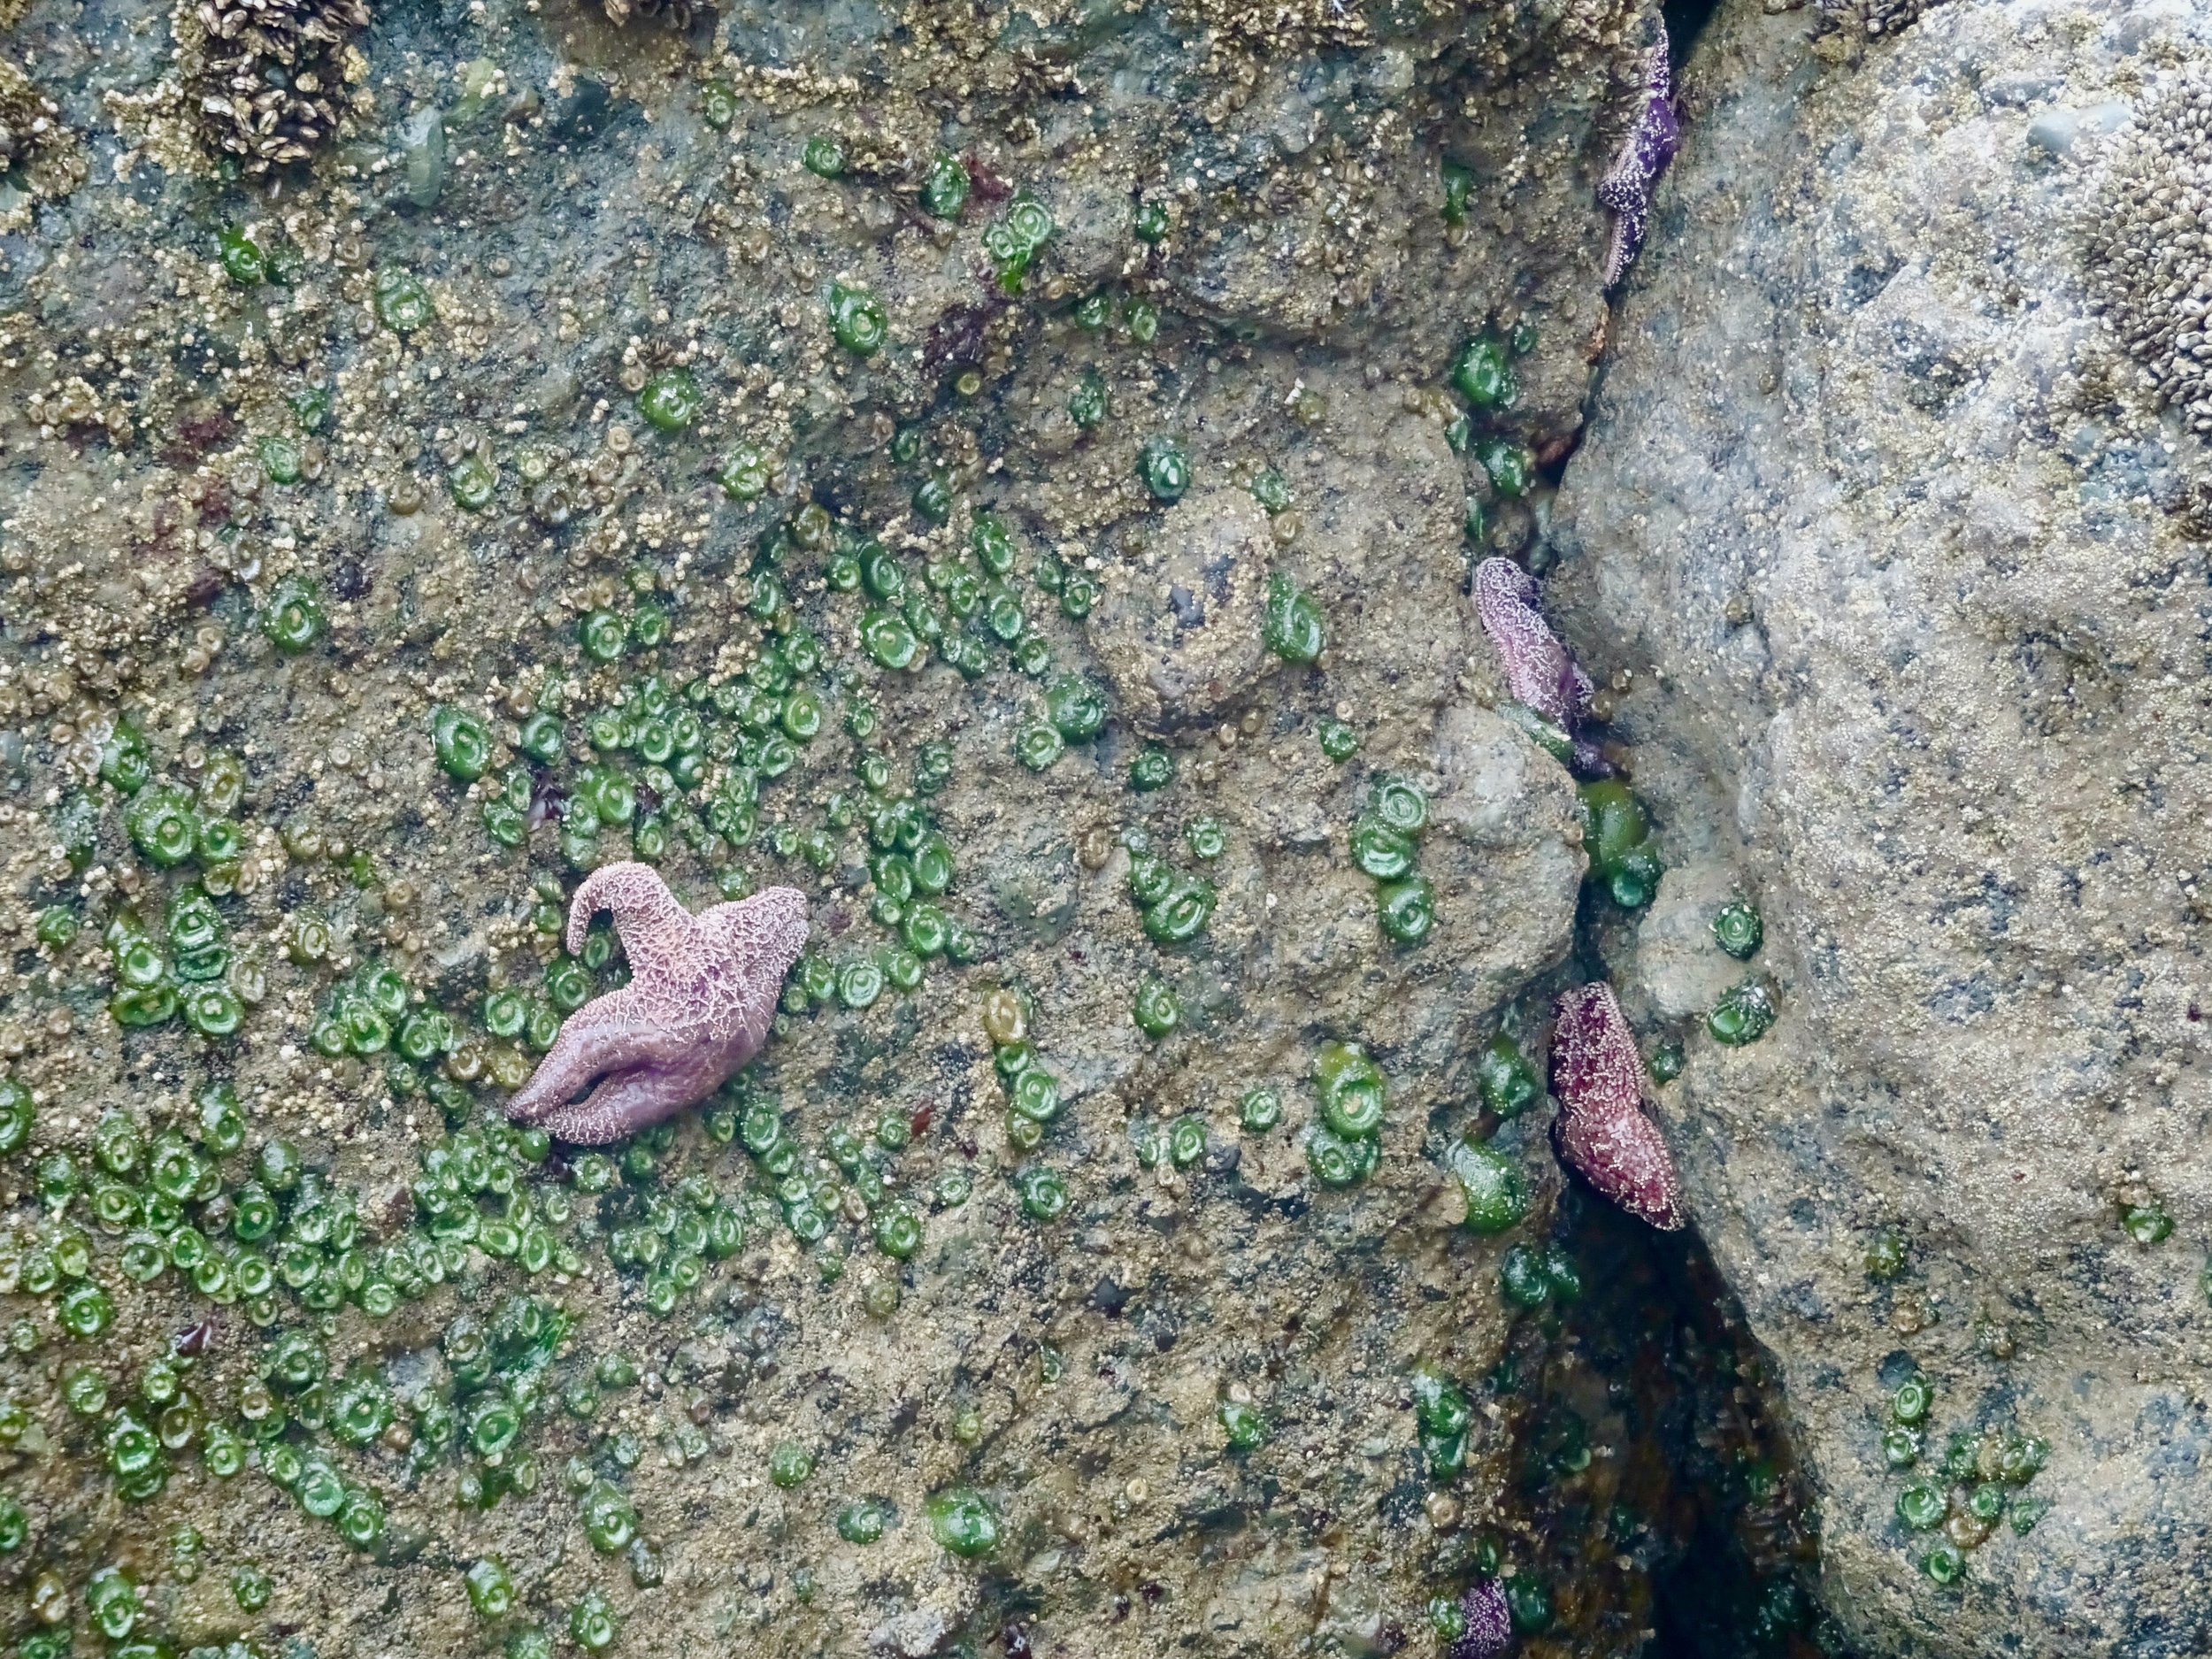 These sea stars are just as likely on open walls as crammed into tighter spaces